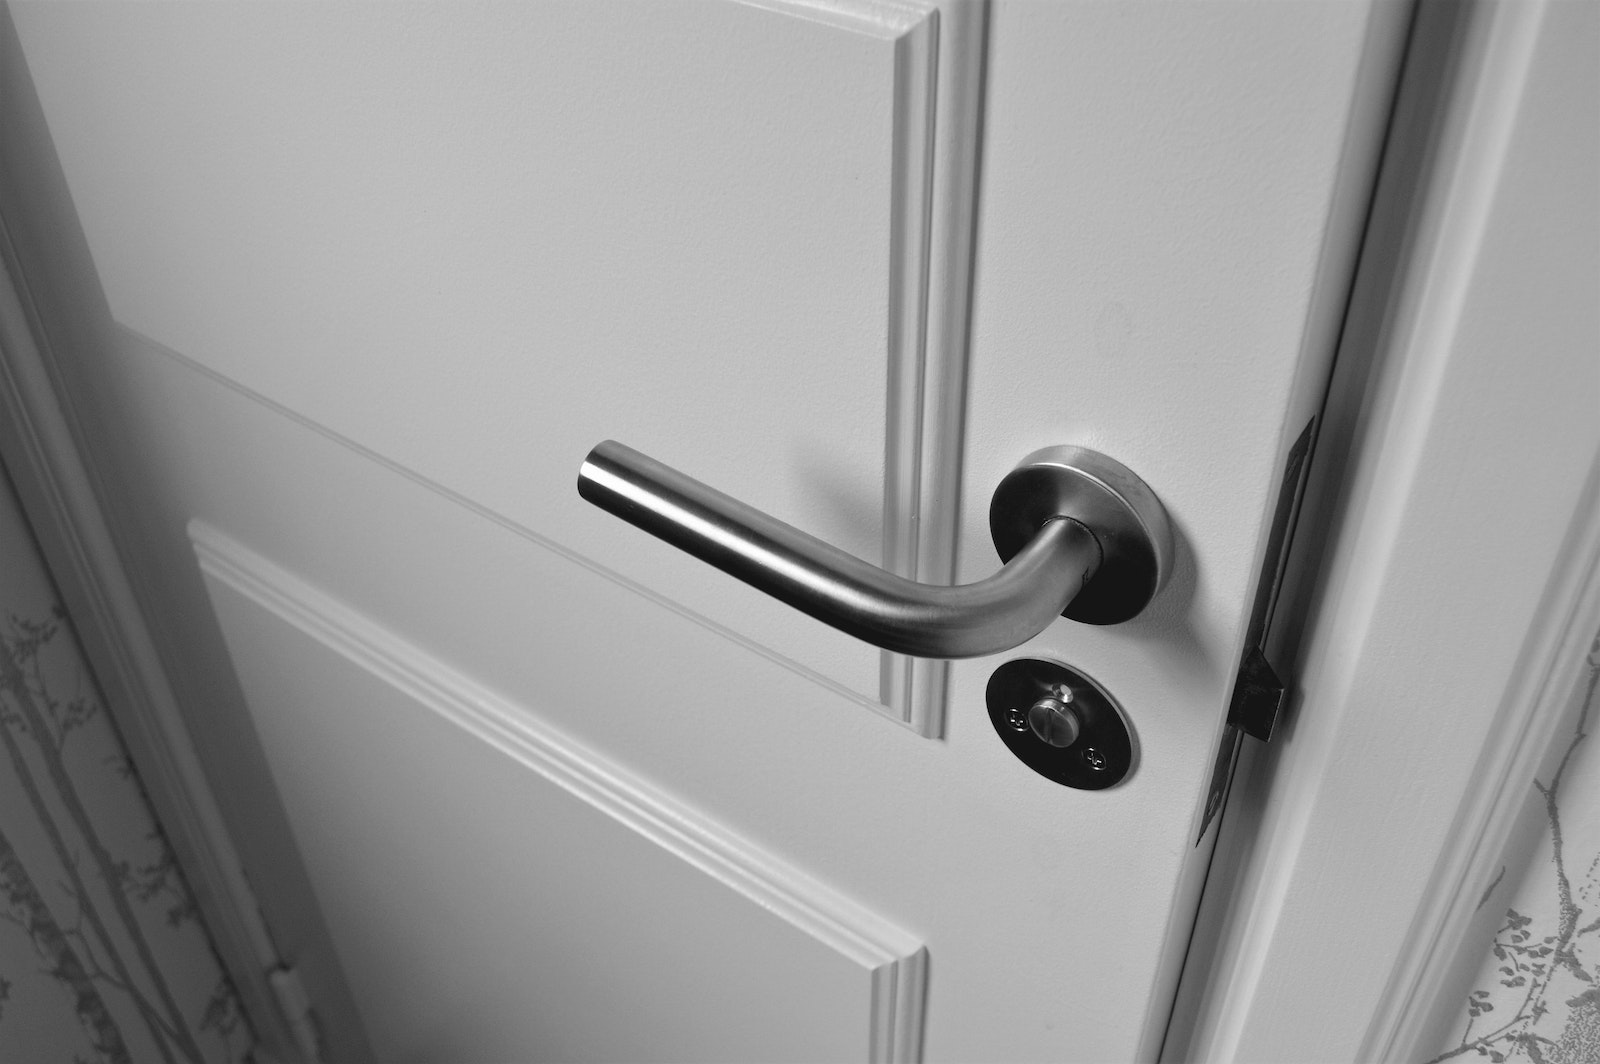 How to Keep Door From Closing Properly